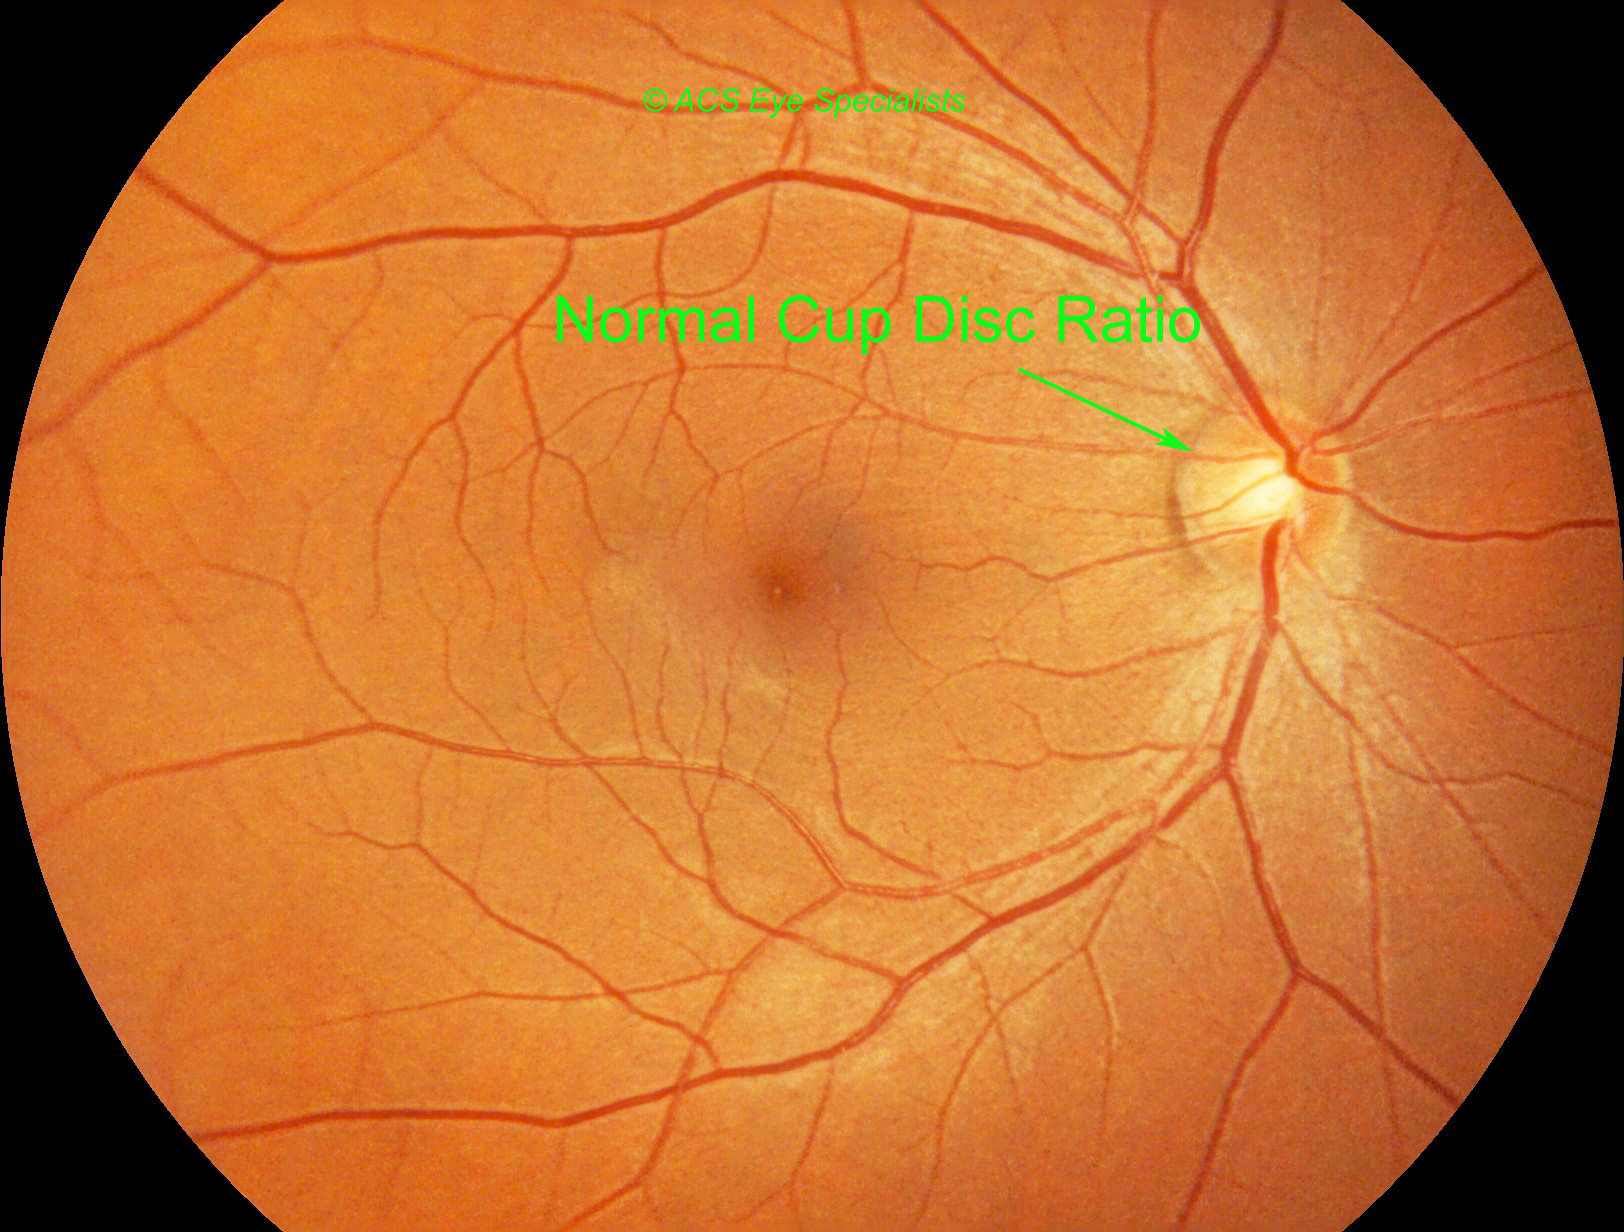 glaucoma normal cup disk ratio